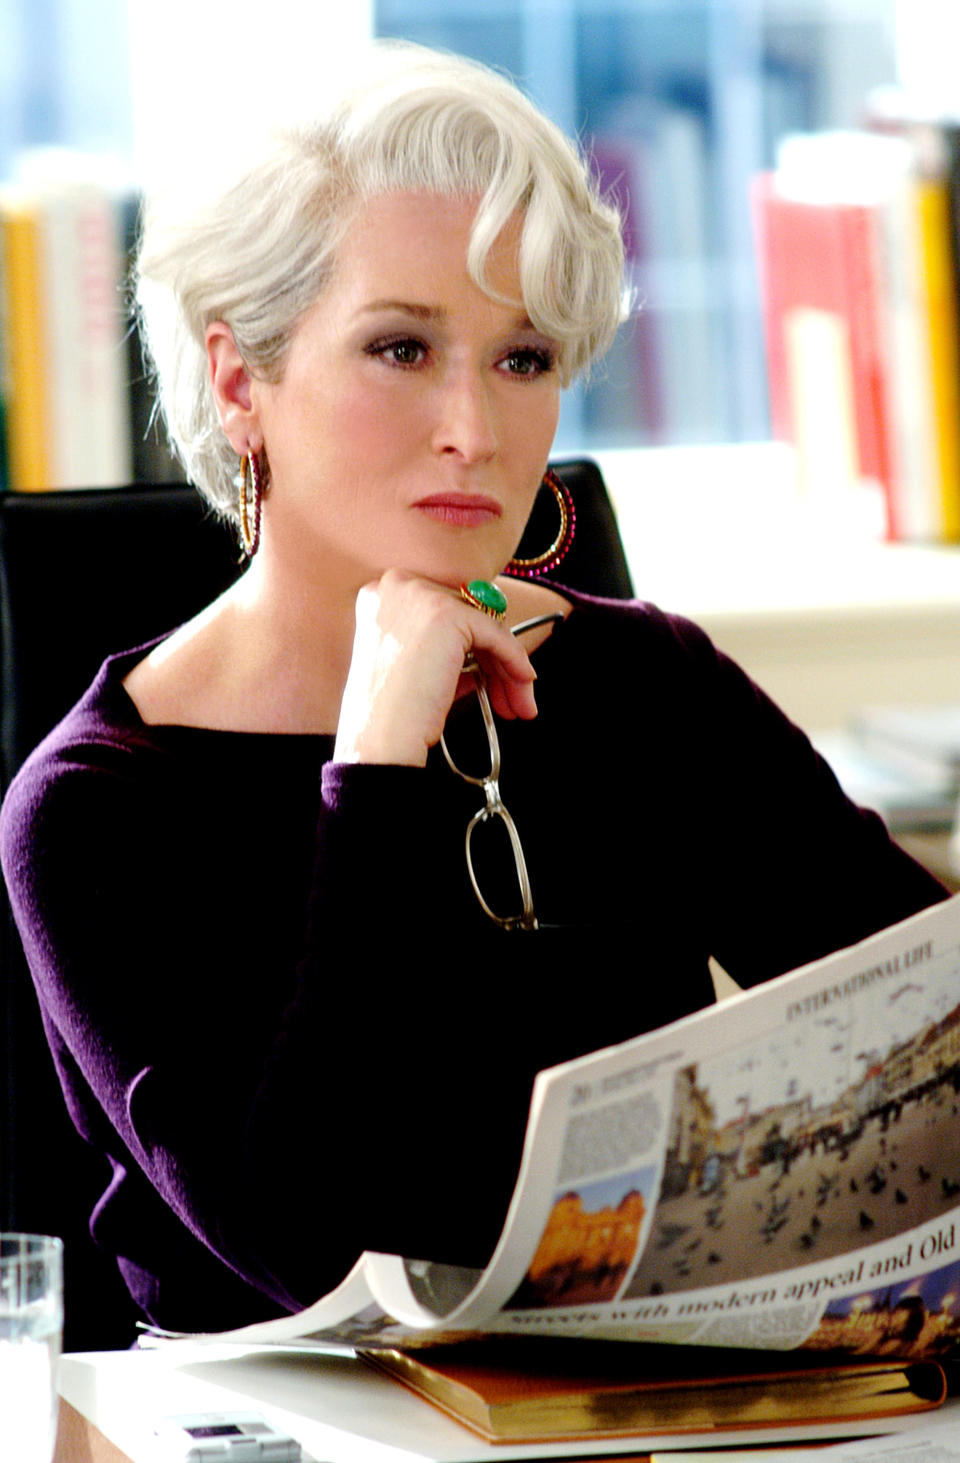 Meryl Streep looking pensive with a newspaper in her hand